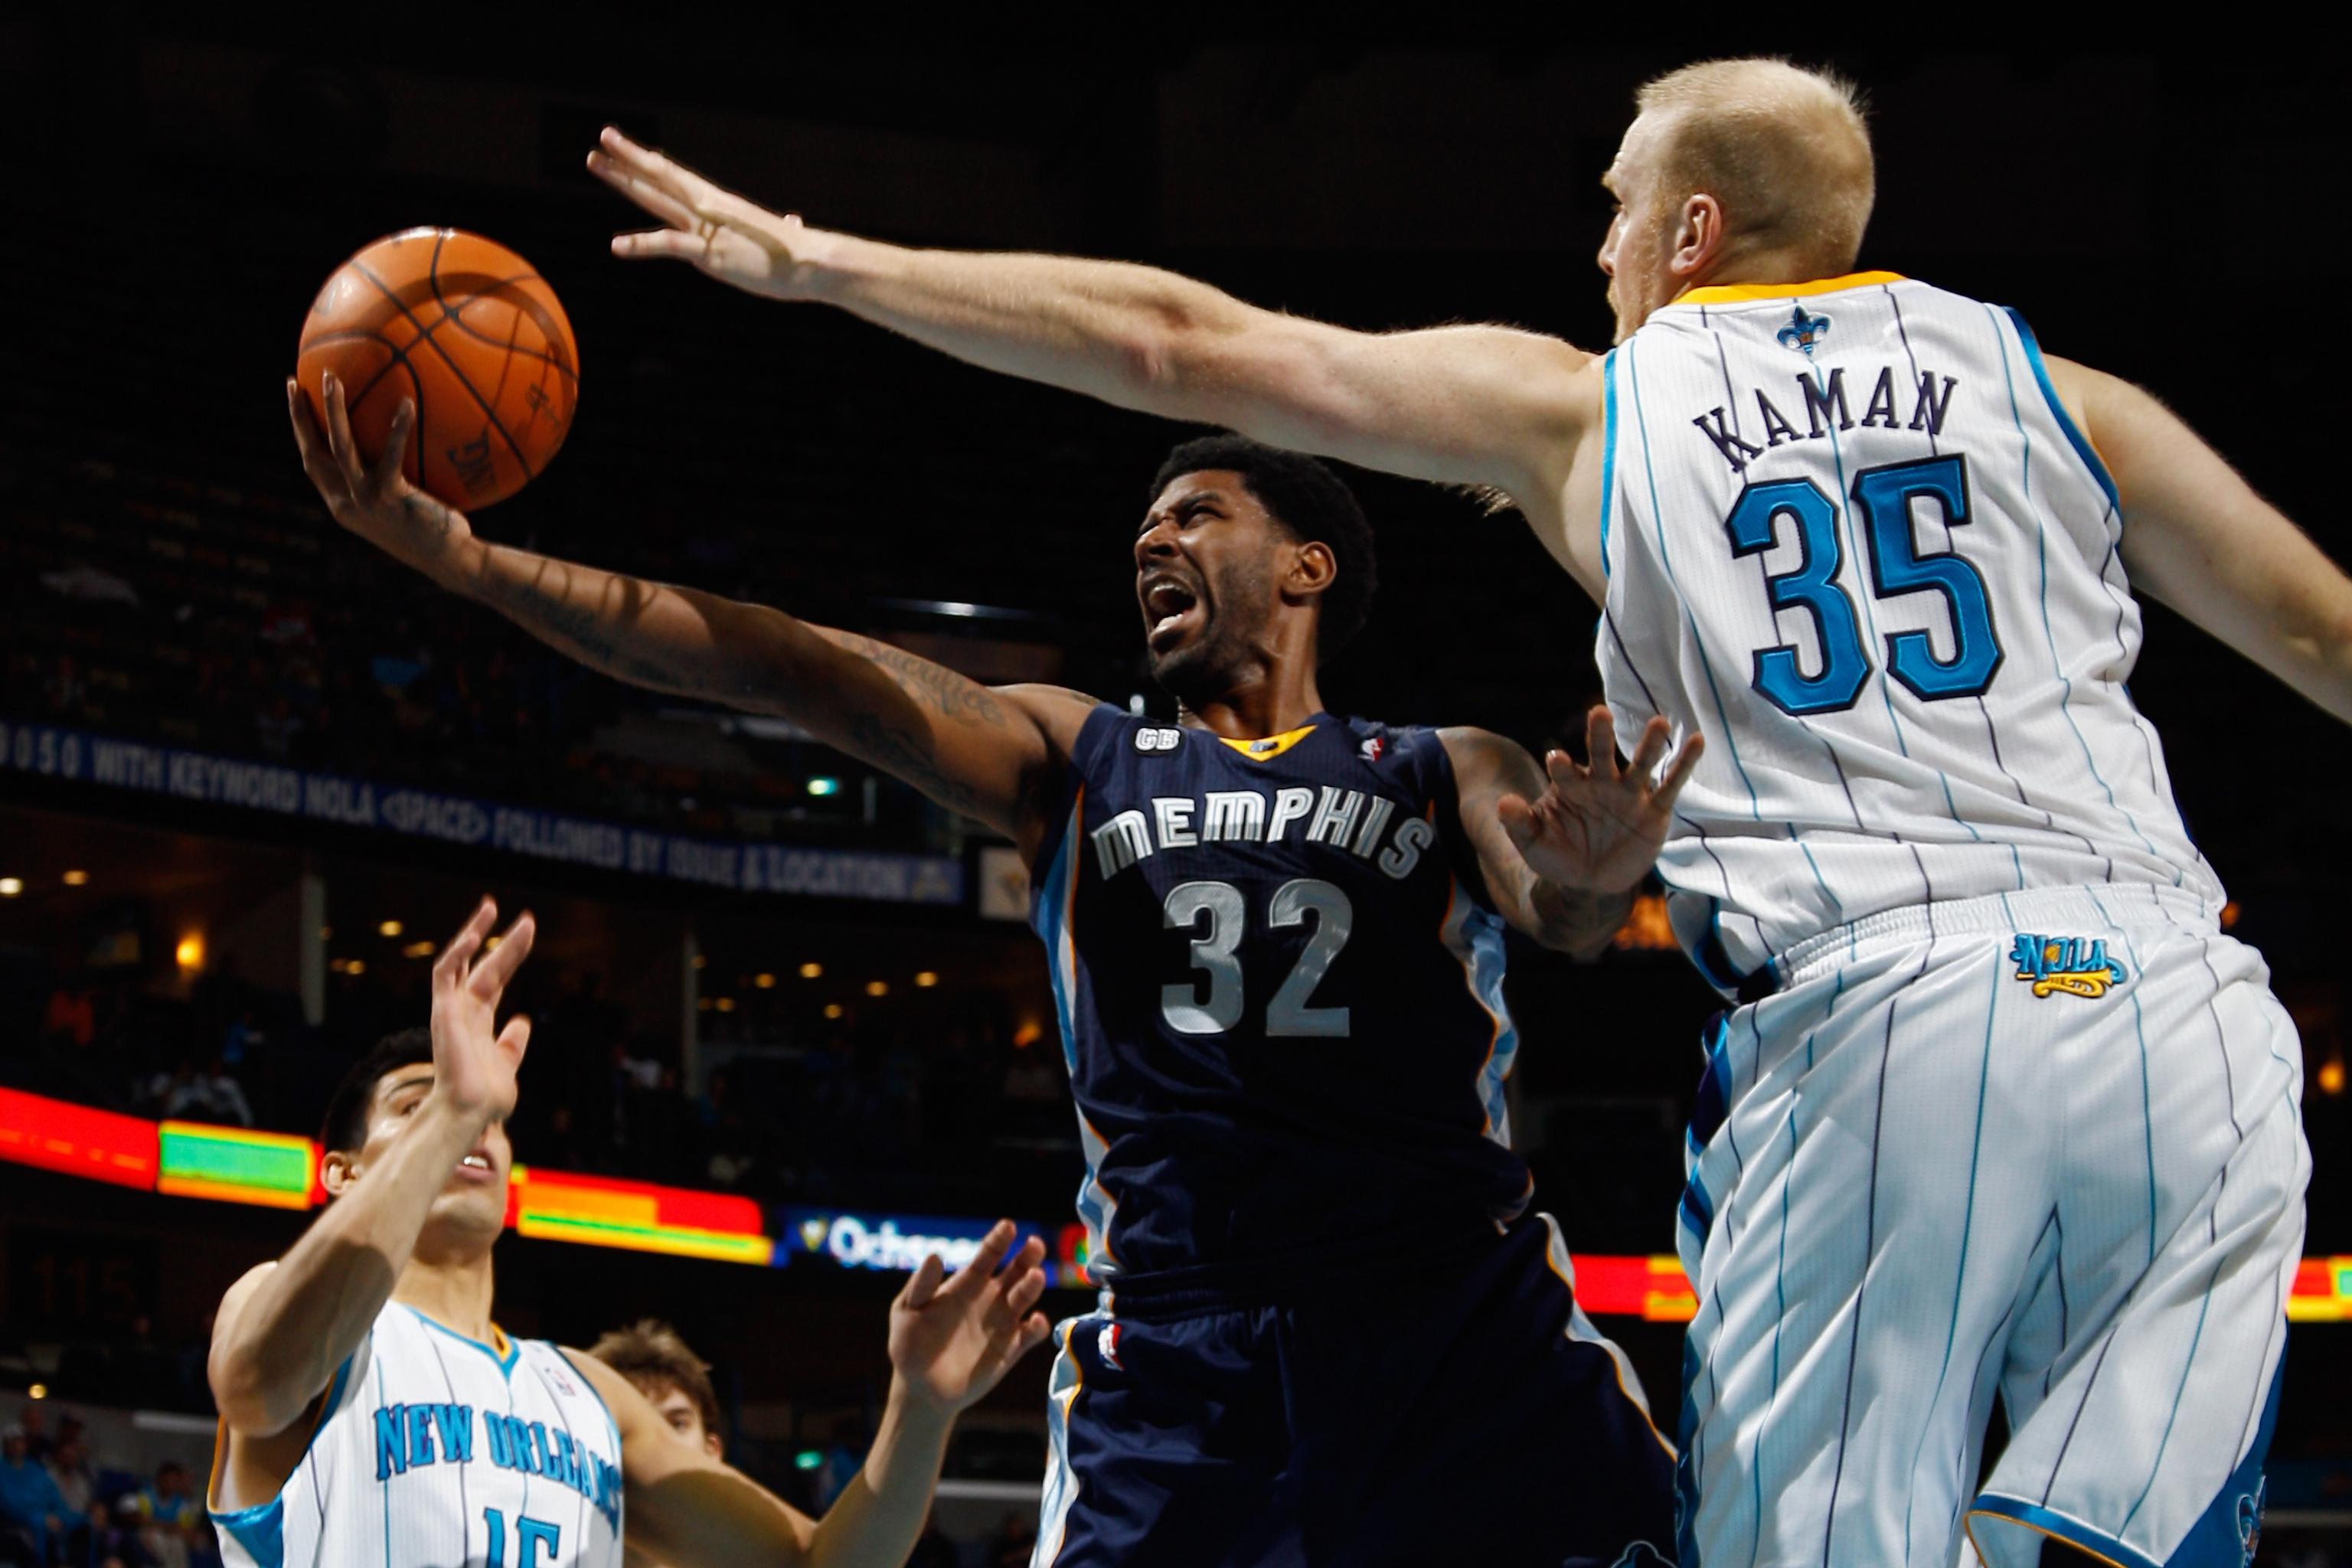 Cleveland Cavaliers reportedly interested in Hornets center Chris Kaman 